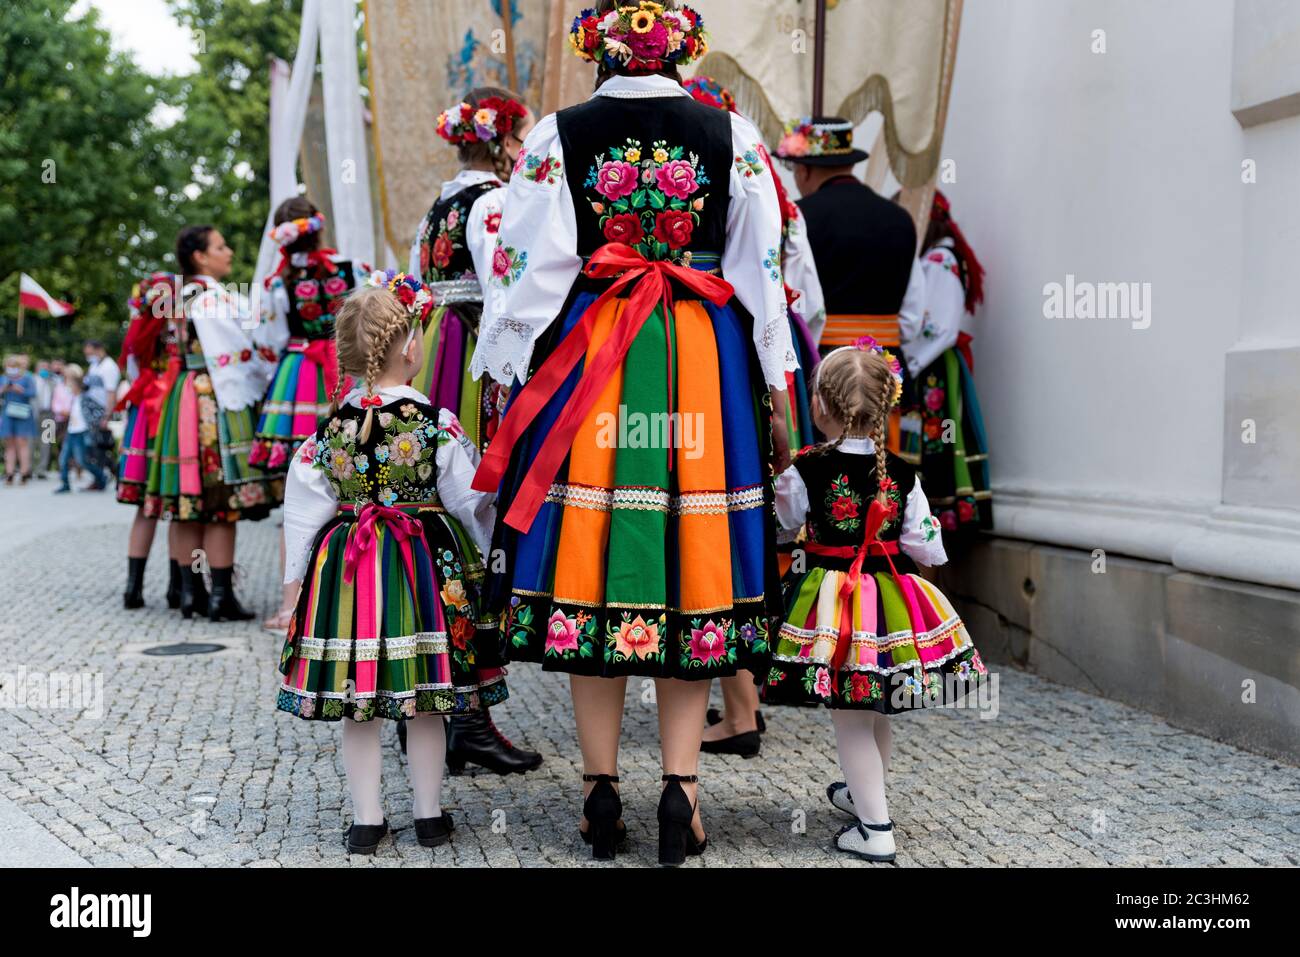 Lowicz, Jun 11, 2020: People dressed in polish national folk costumes from Lowicz region during annual Corpus Christi procession. Close up of traditio Stock Photo